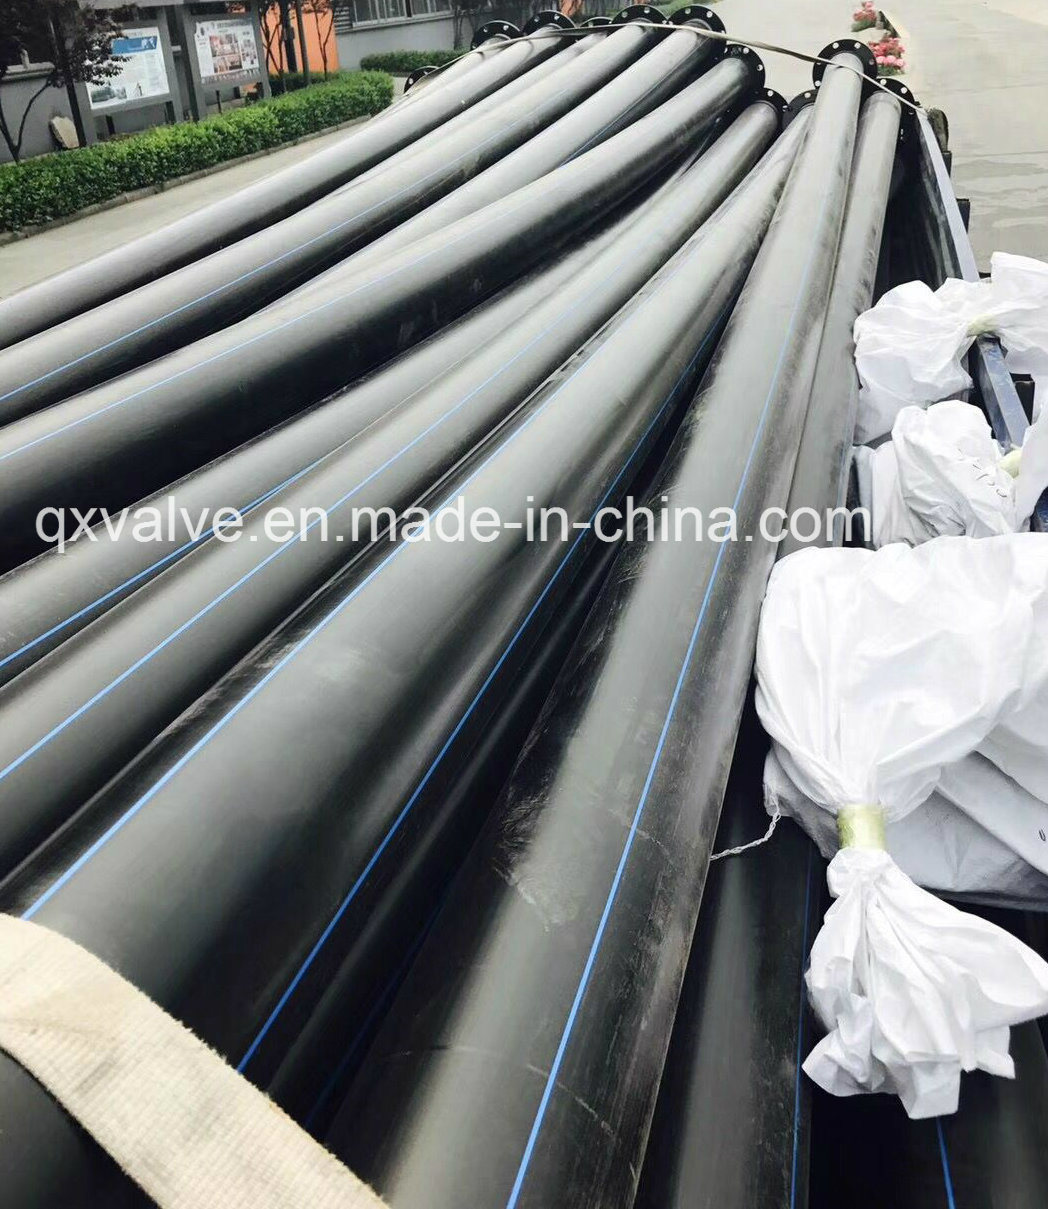 Flexible Irrigation Pipes 25mm LDPE Water Hose